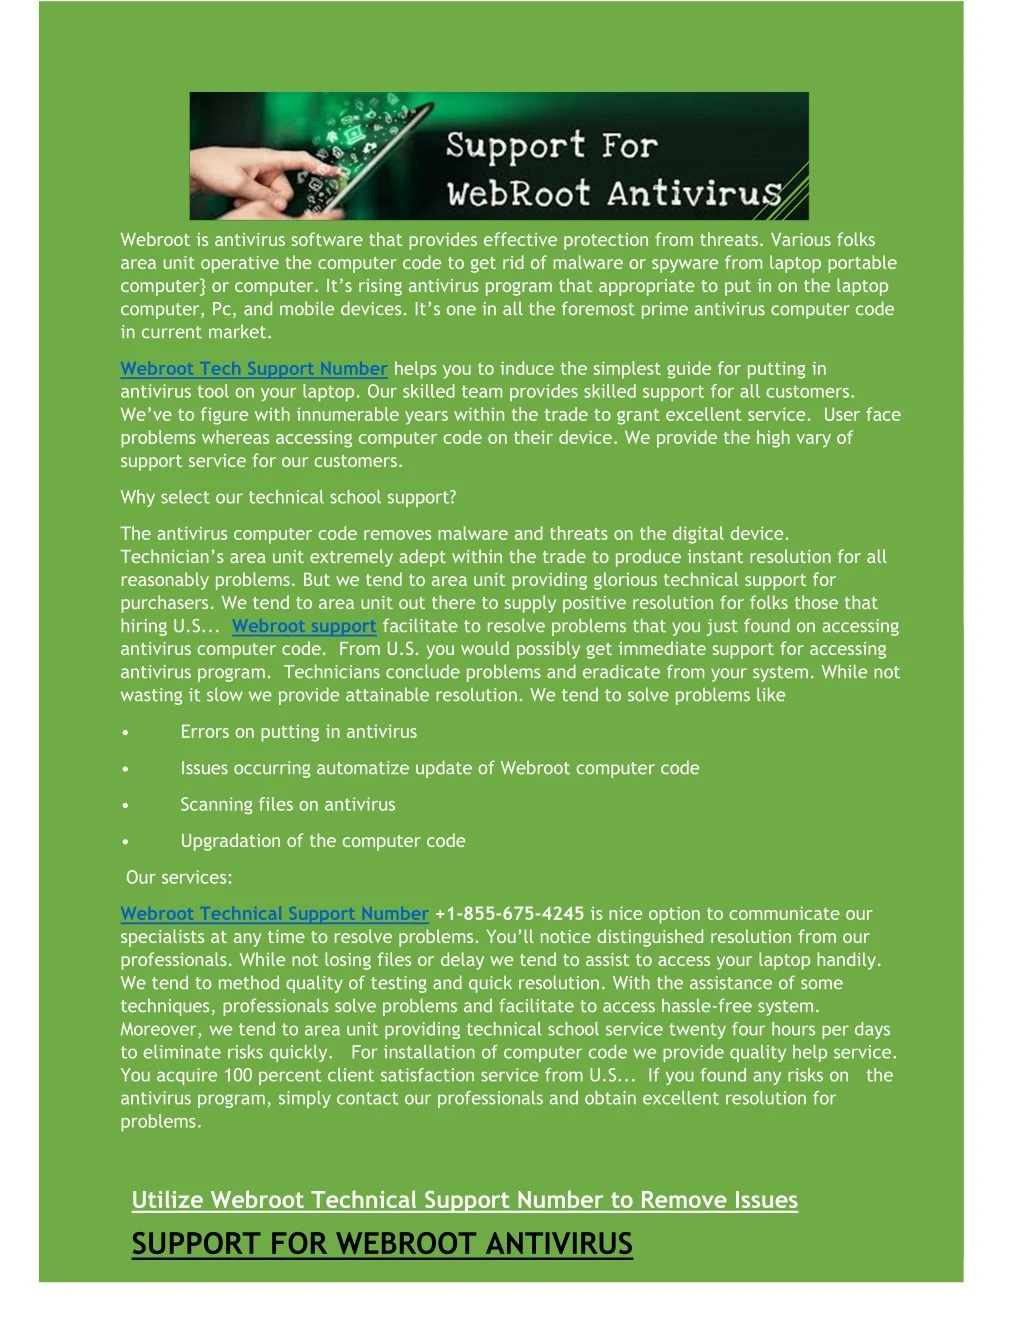 webroot is antivirus software that provides